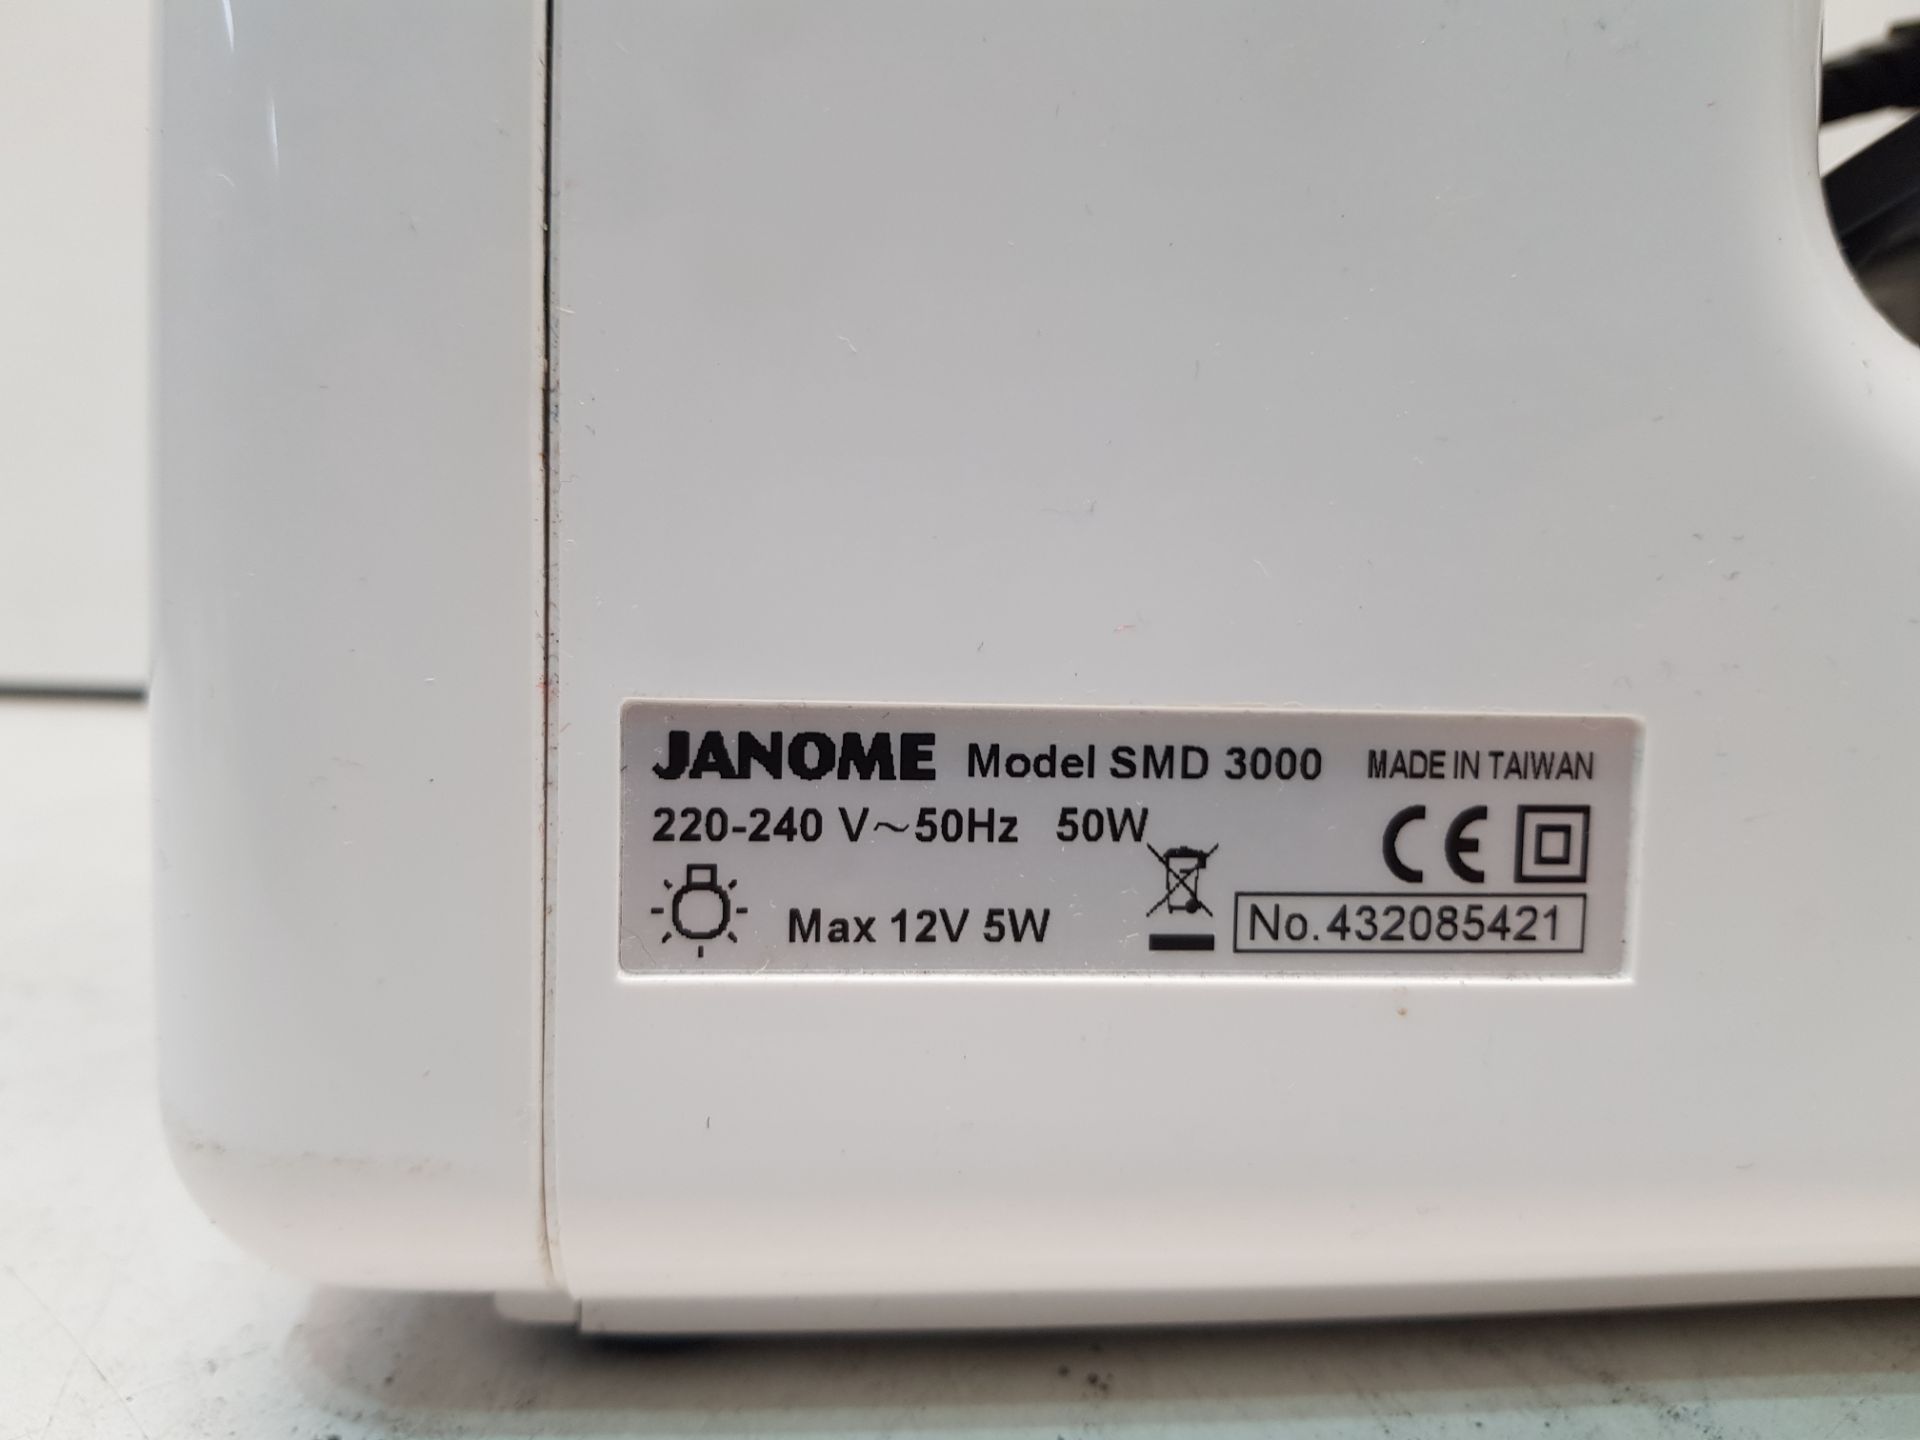 Janome SMD 3000 Sewing Machine S/N: 432085421 - Image 2 of 4